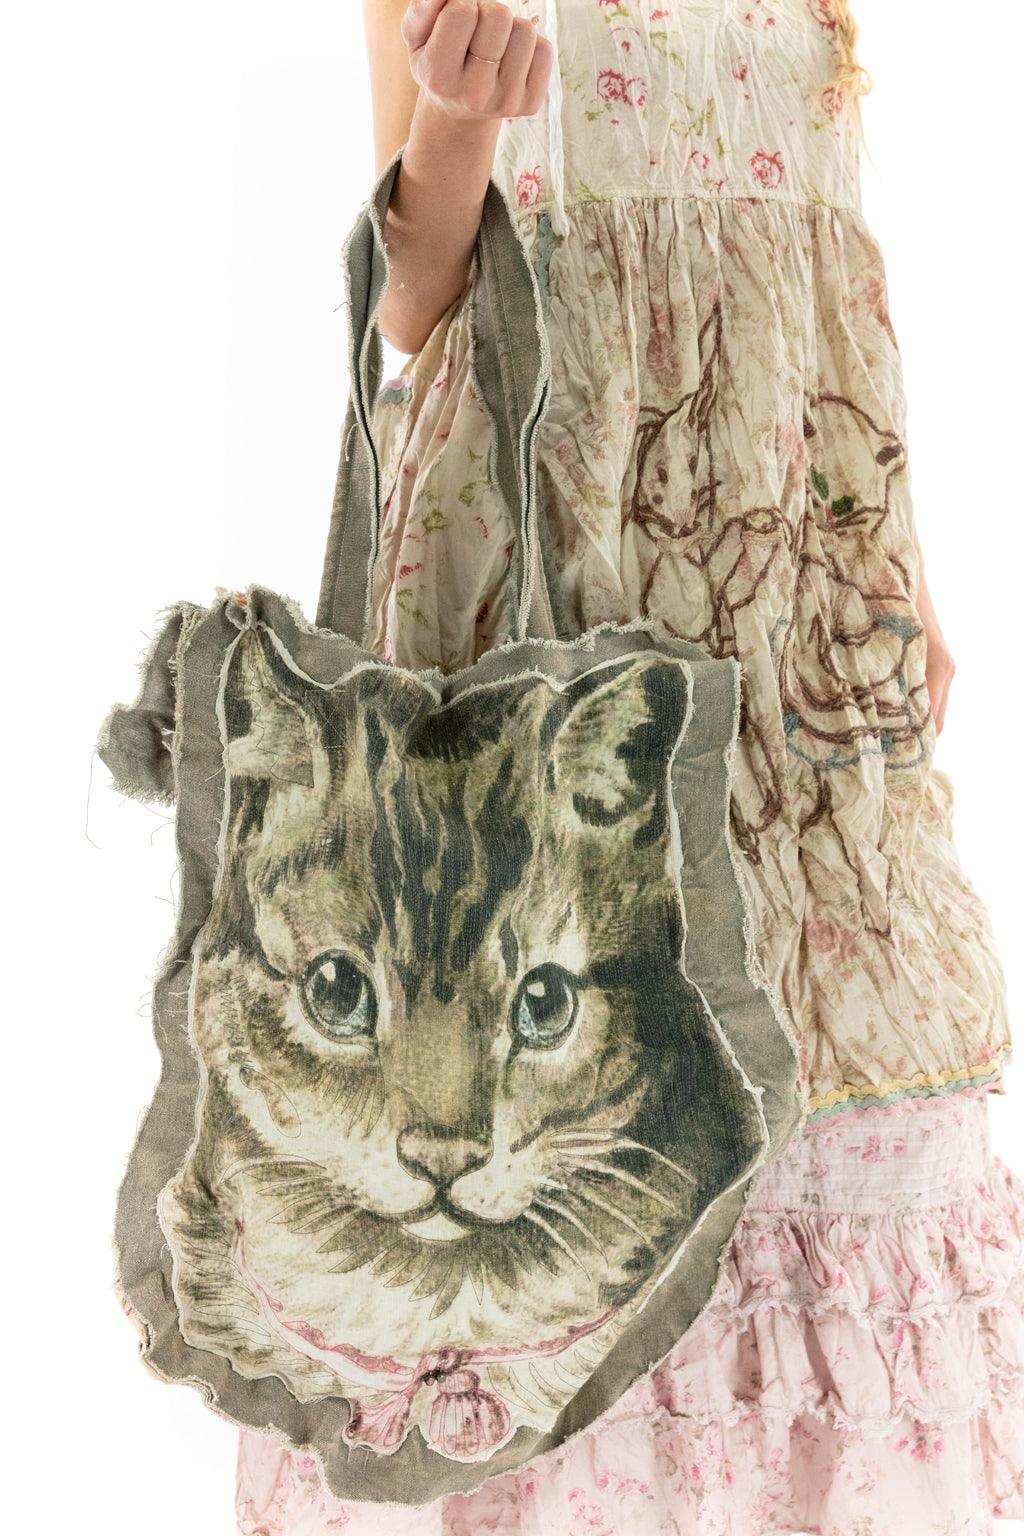 Greylag Goose Tote Bag by Mountain Dreams - Pixels